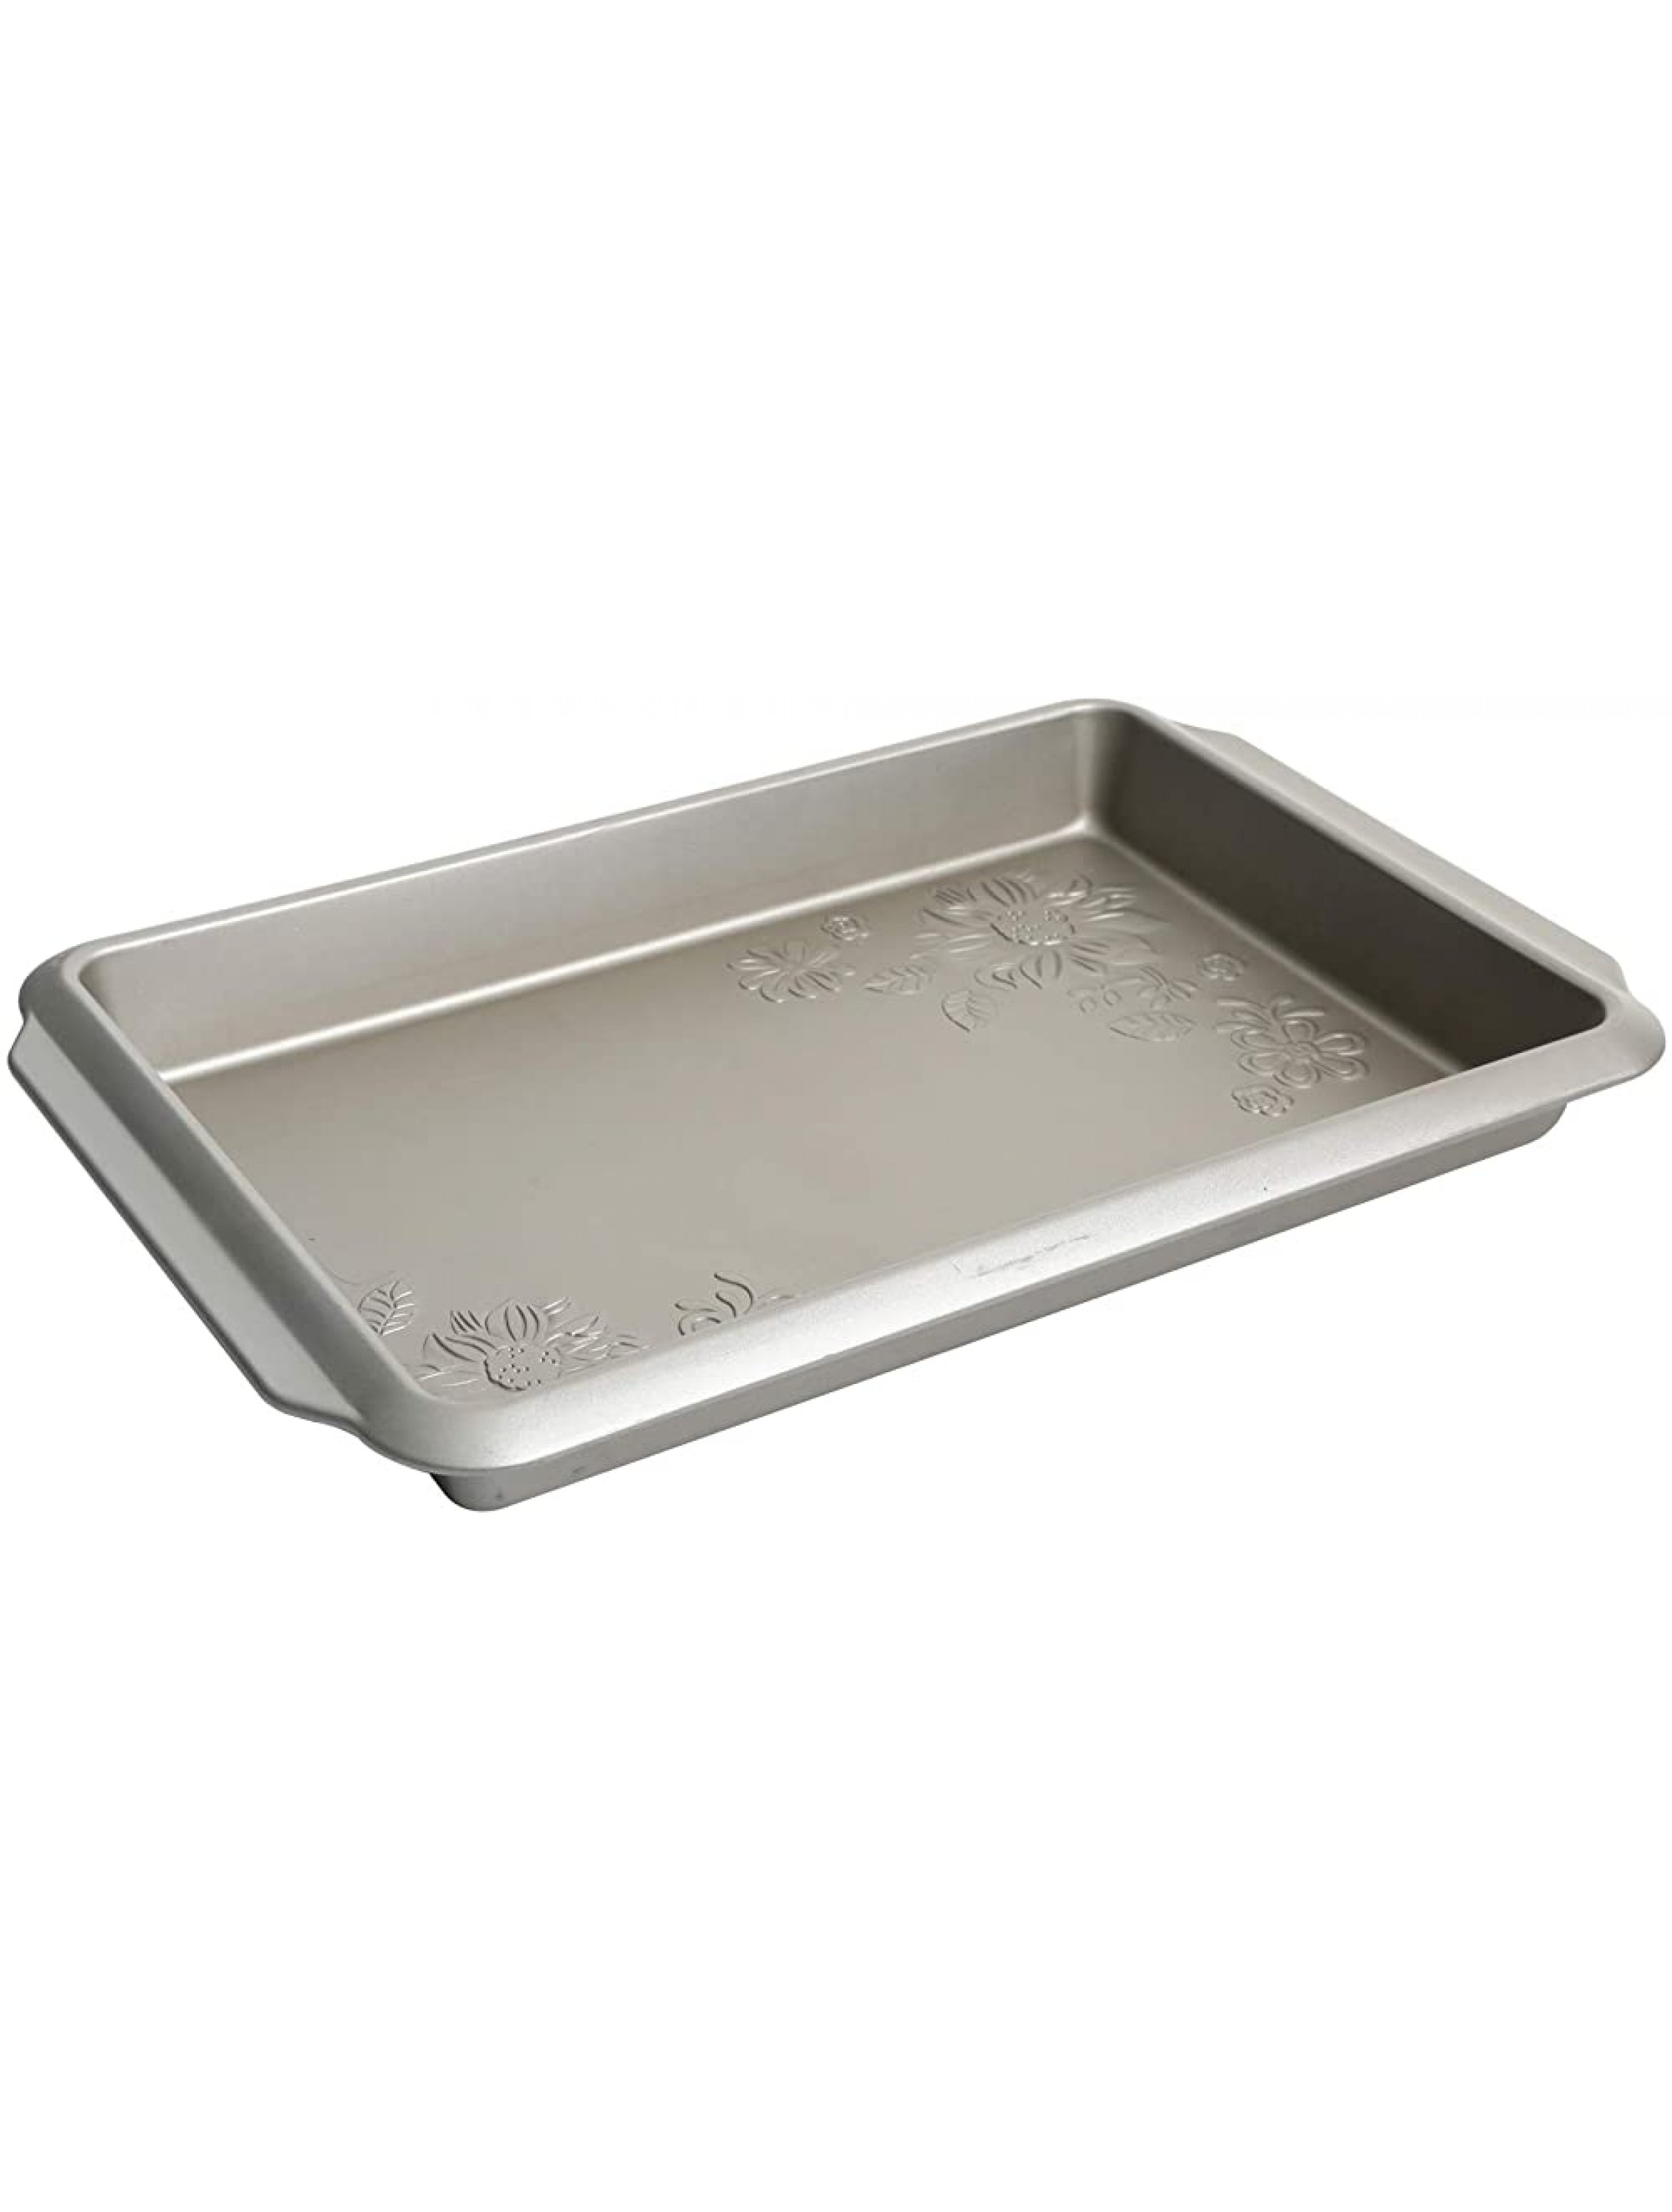 Roasting Pan Cookie Sheet Non Stick Bakeware Silver Finish Baking Tray 13 x 9 Broil Pan by Imperial Home - BG407WRO3